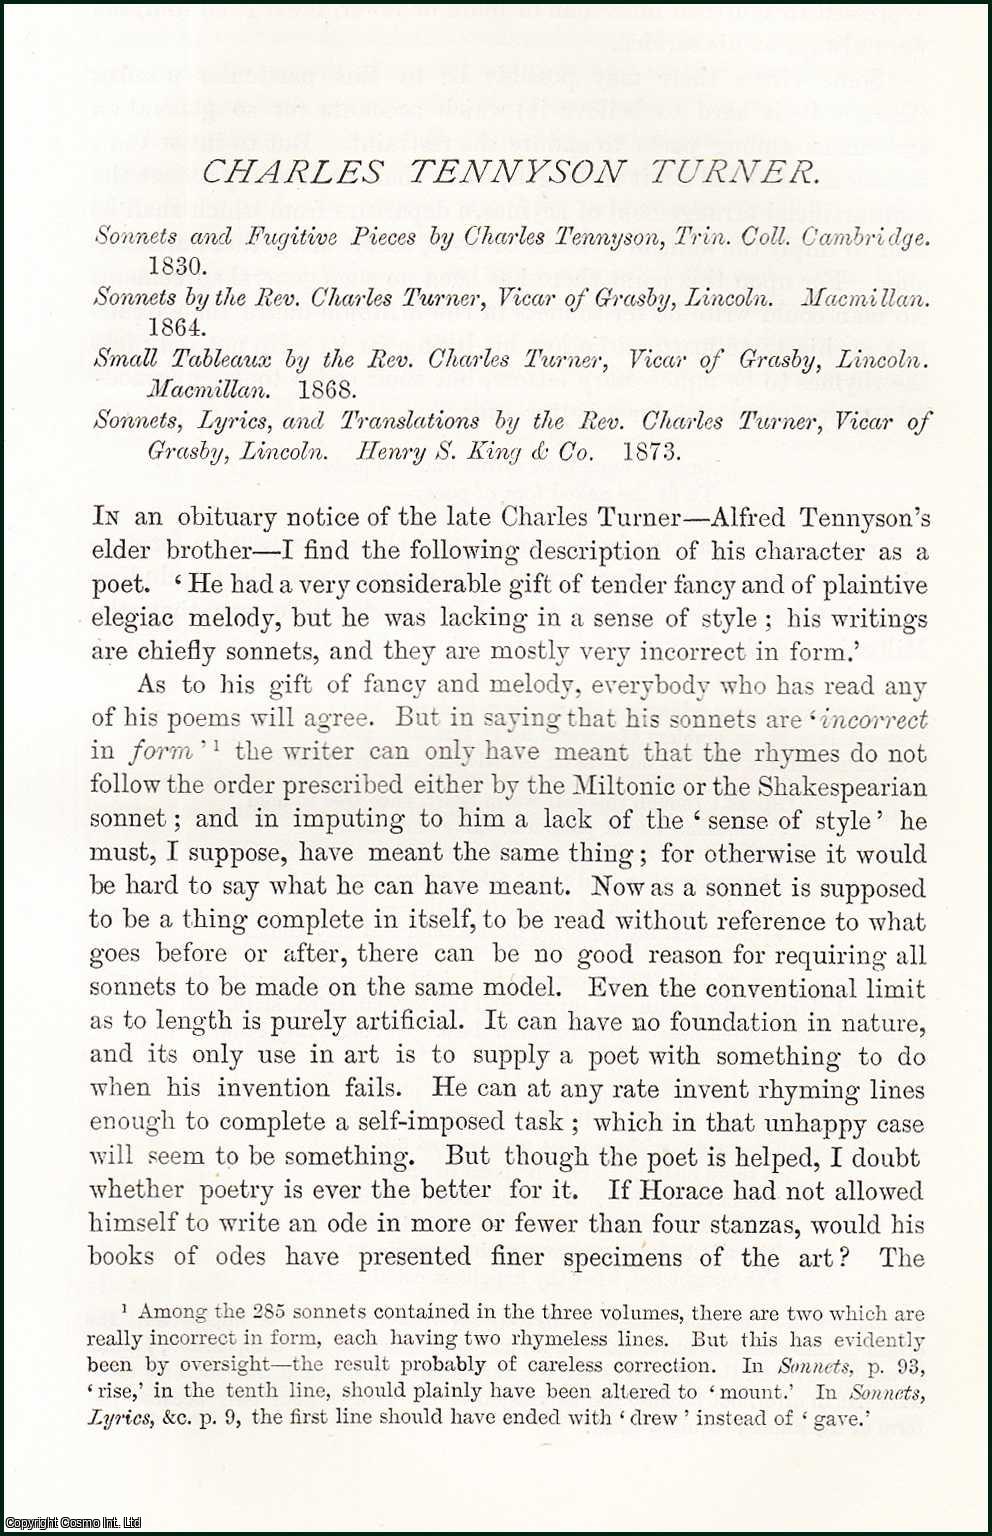 James Spedding - Charles Tennyson Turner : a review and summary of the poetry of the late vicar, brother to Lord Tennyson. An original article from the Nineteenth Century Magazine, 1879.